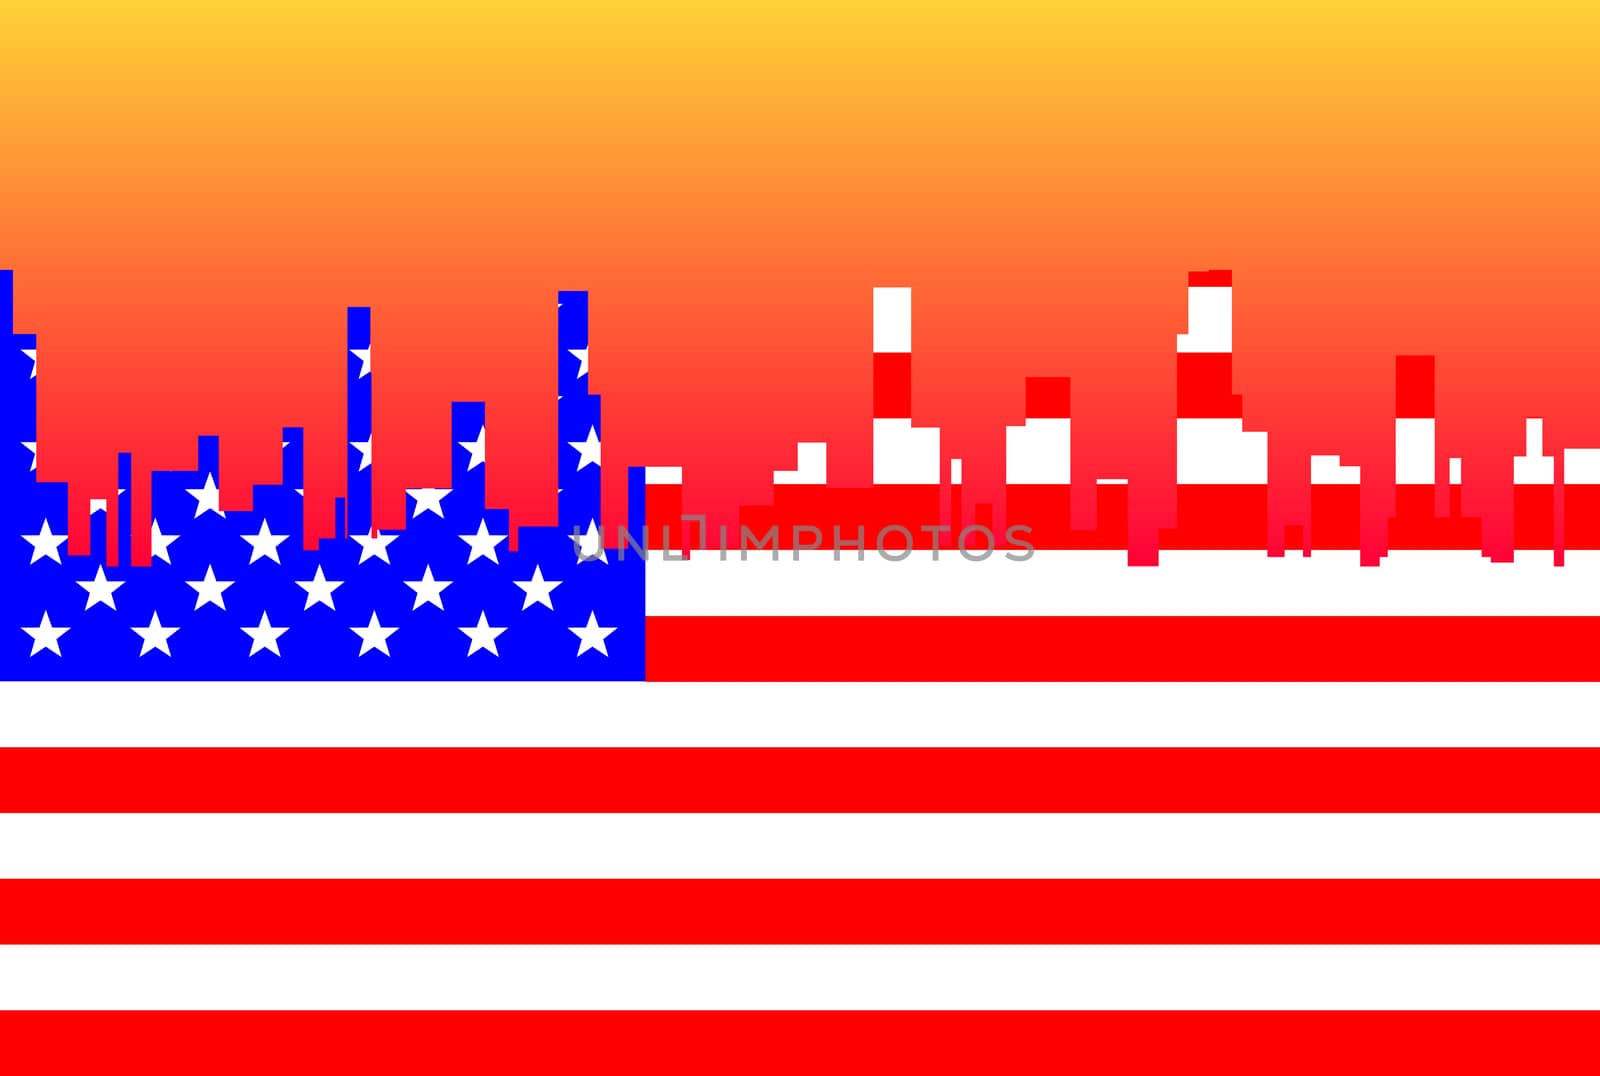 A cityscape in the colors of the Stars and Stripes flag